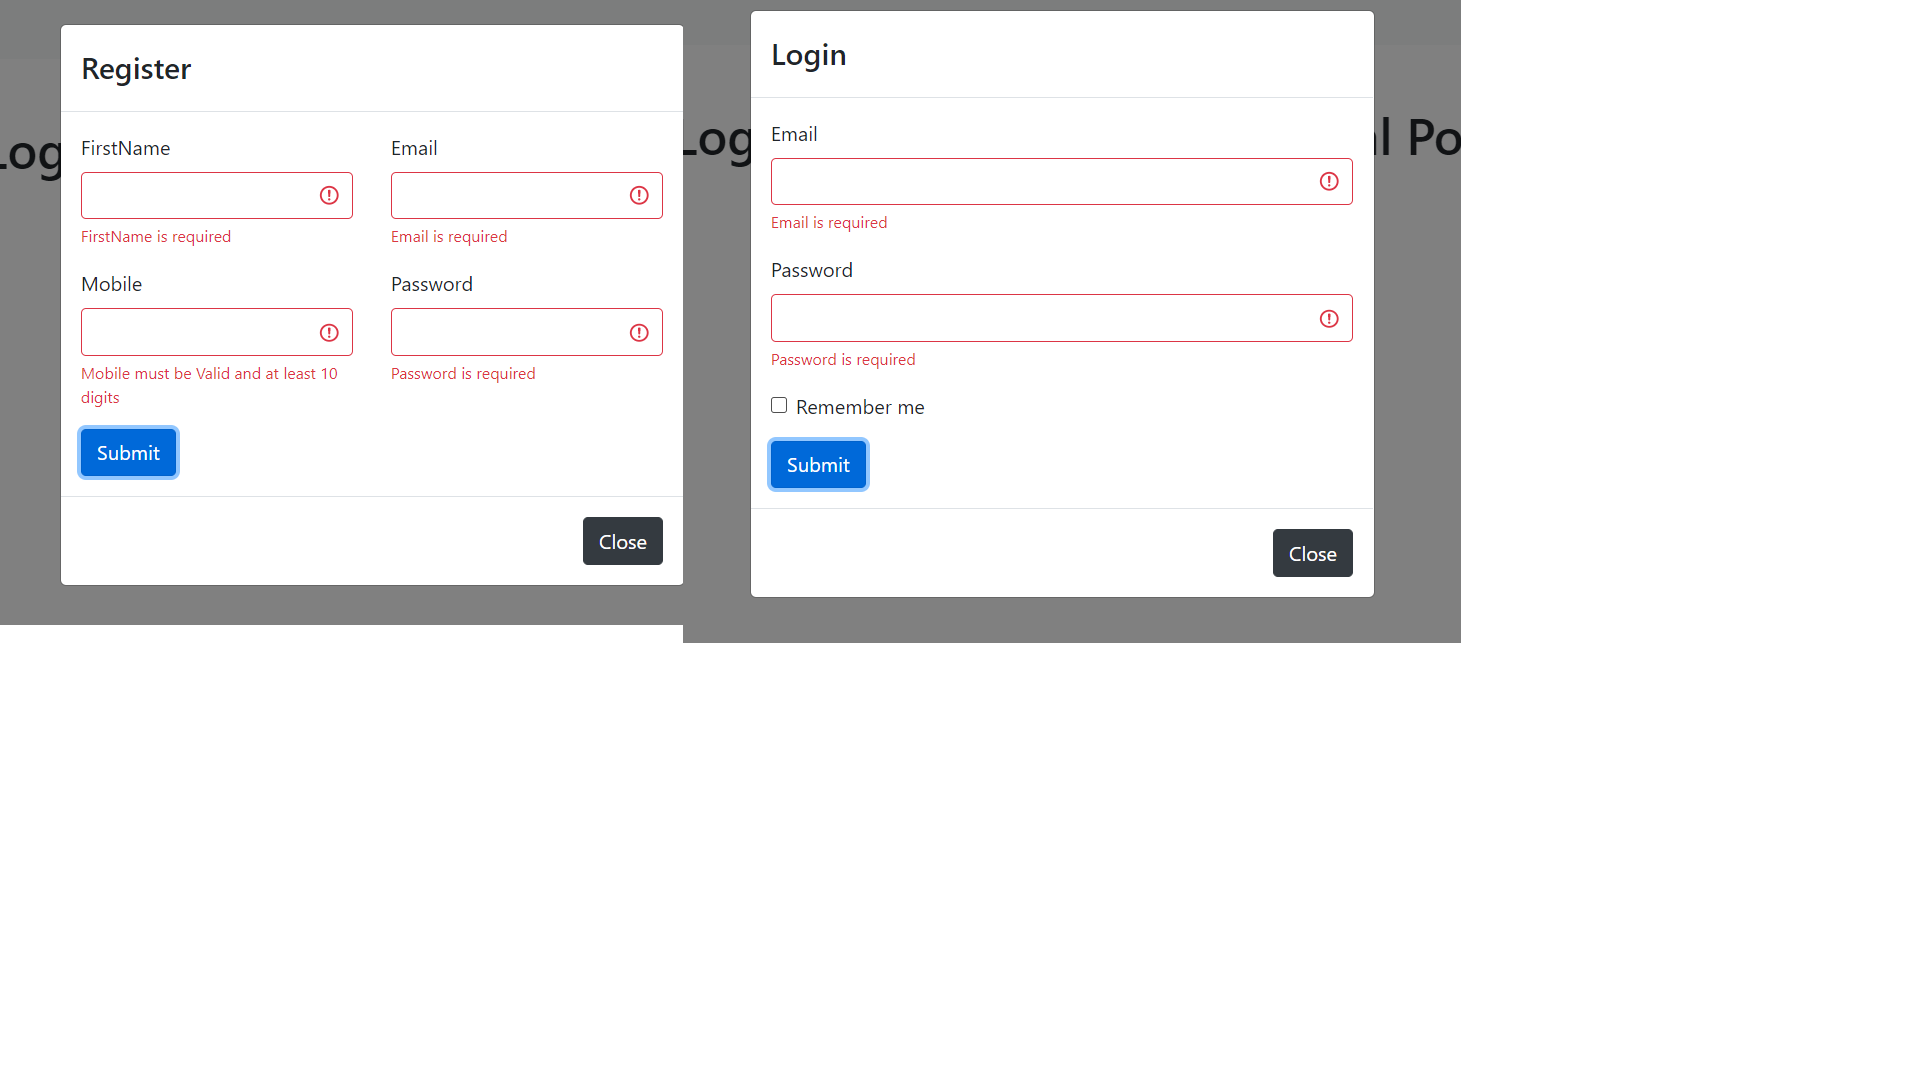 Angular 10 Bootstrap modal registration and login forms with validations - Therichpost